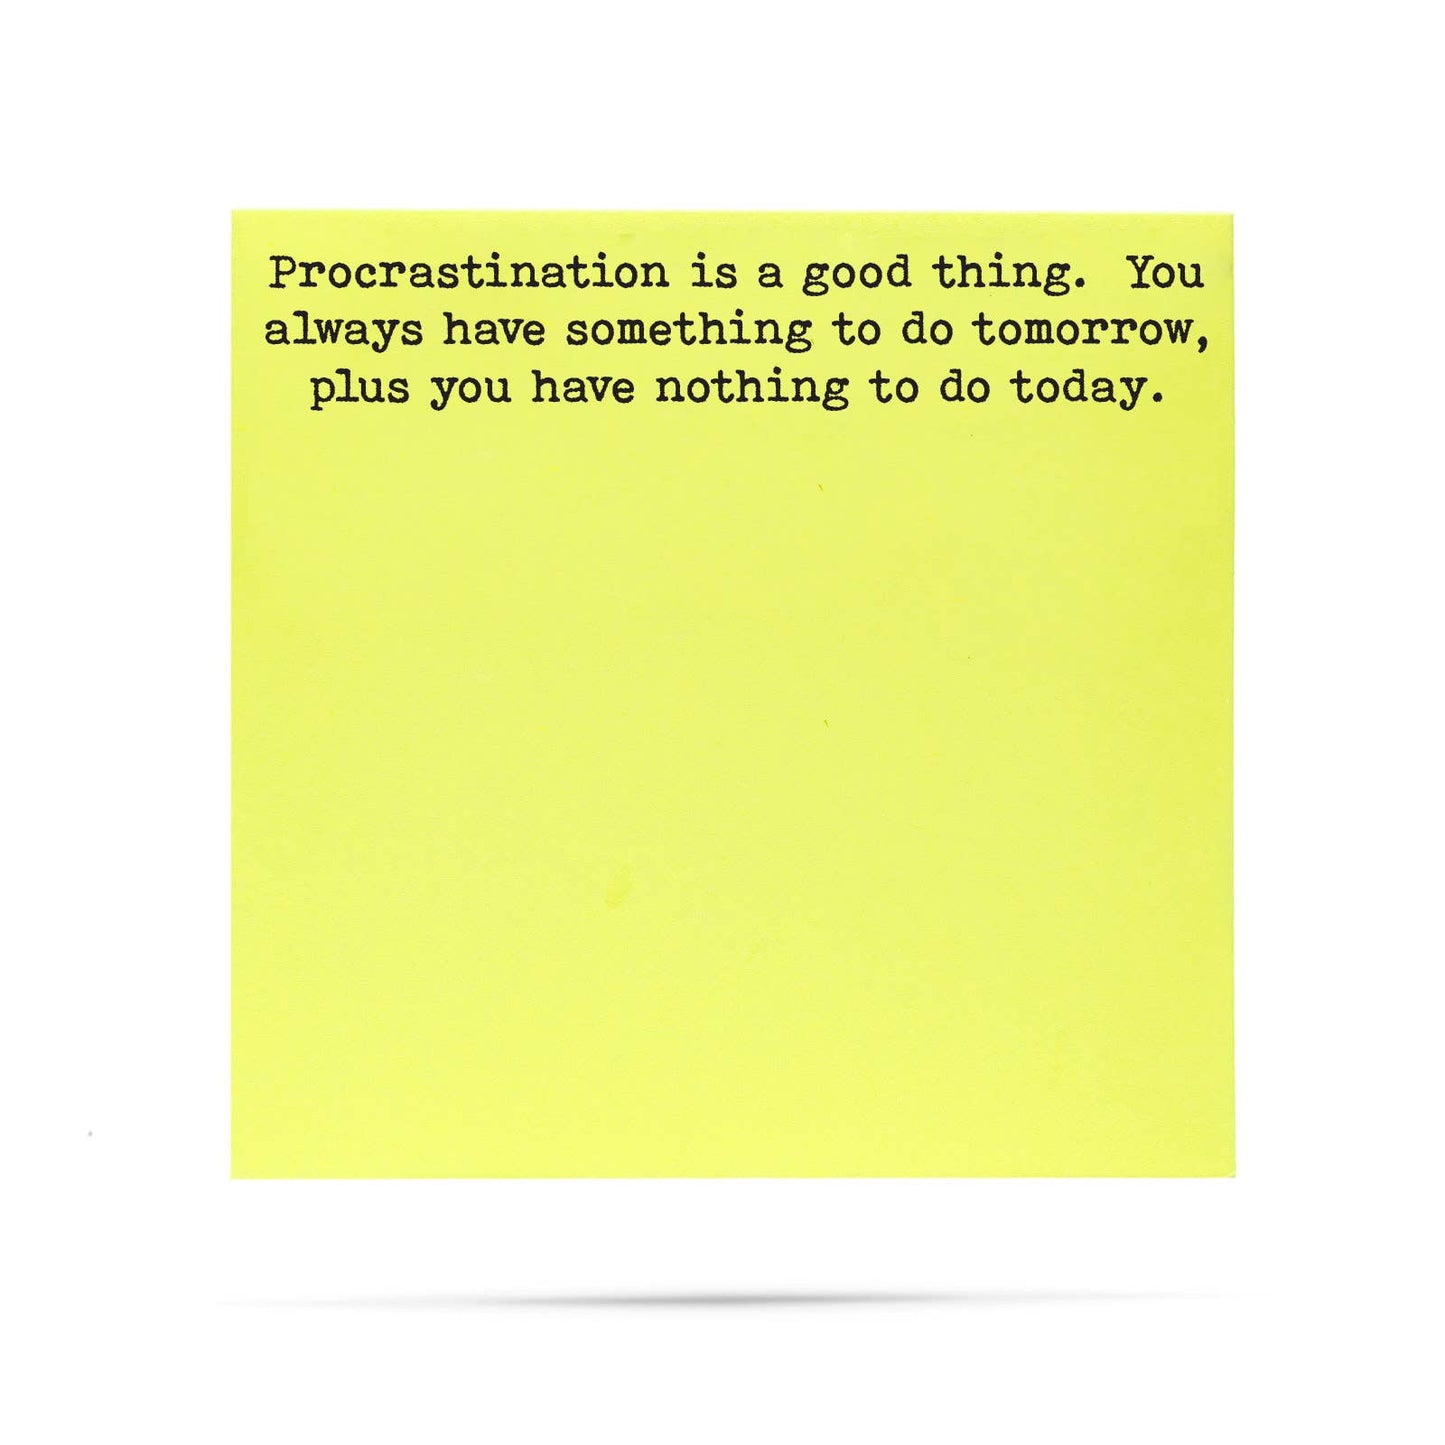 ellembee gift - Procrastination is a good thing |  sticky notes with sayings